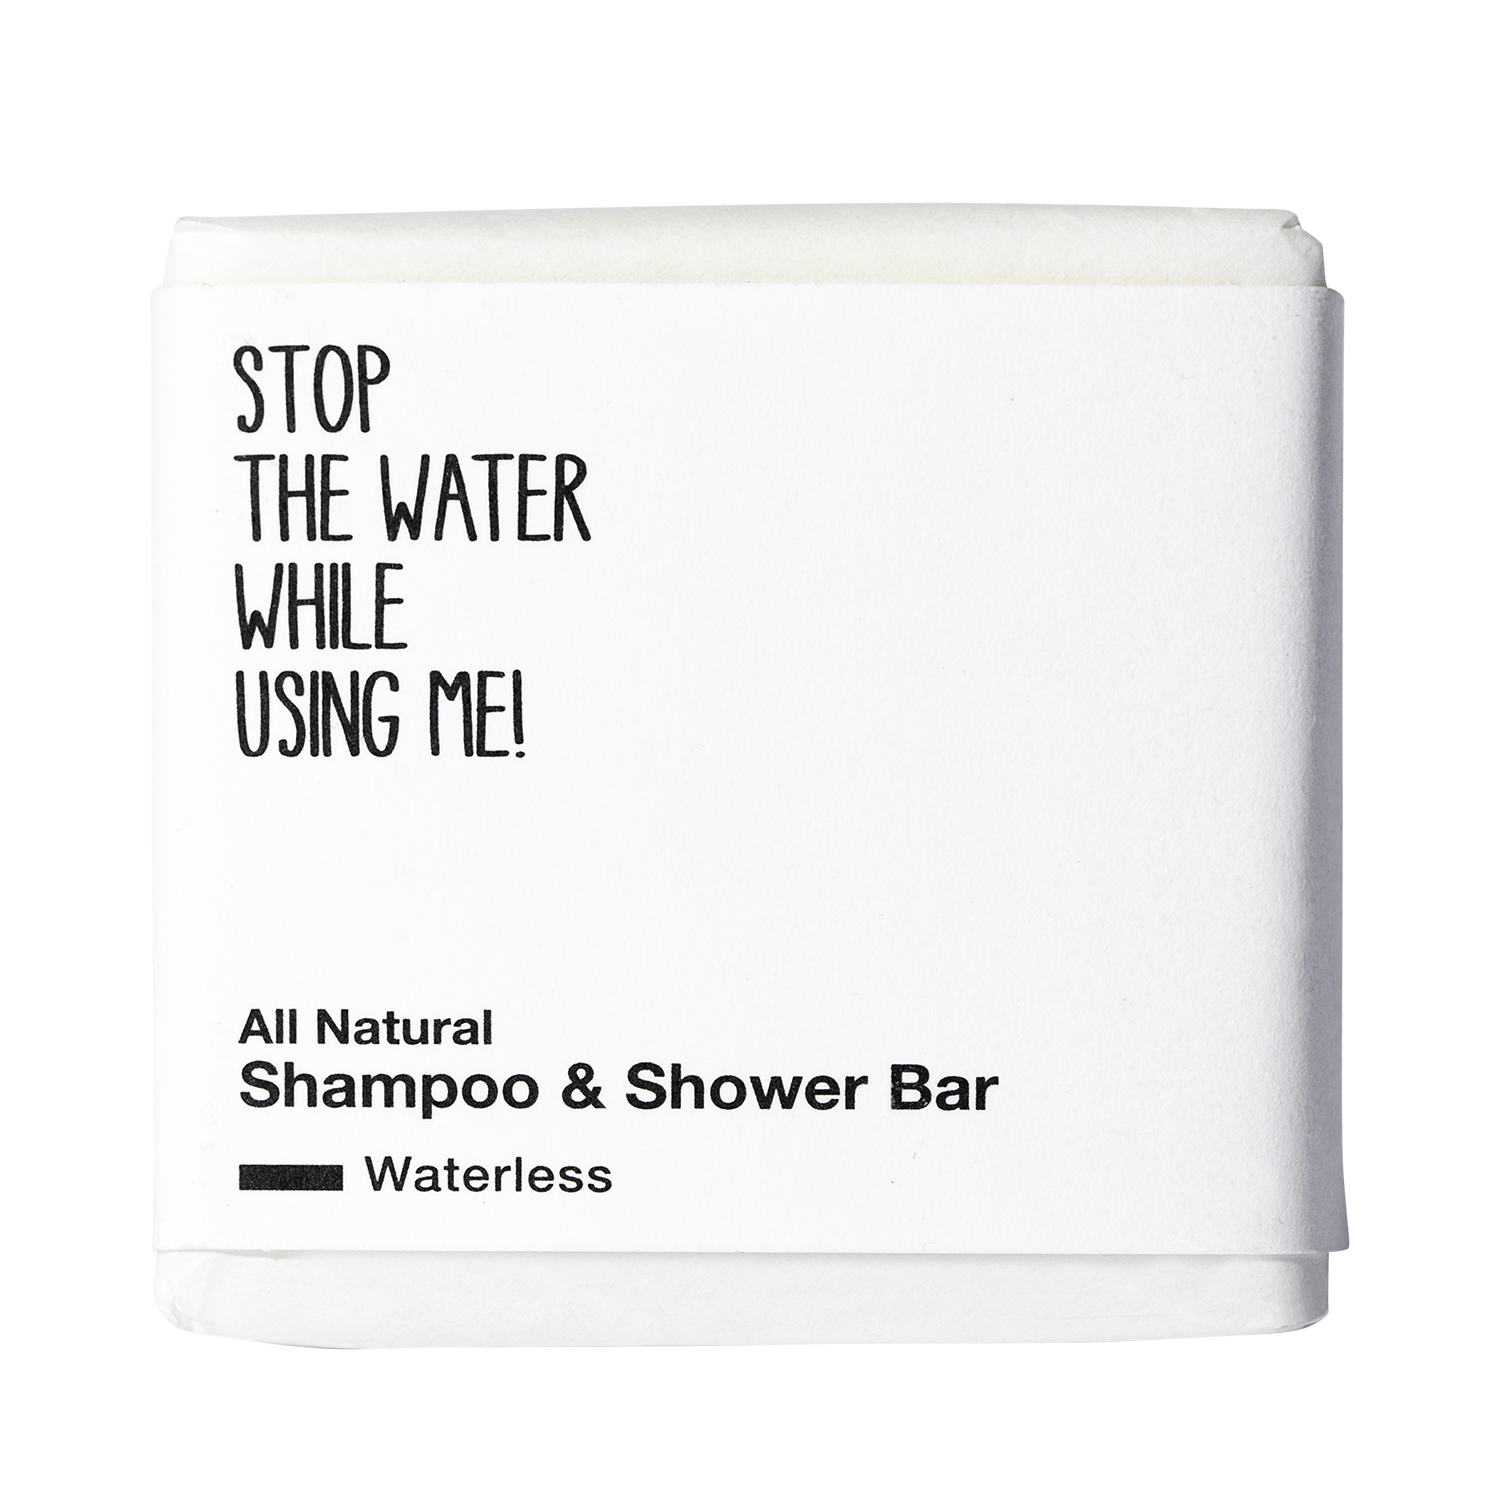 Stop The Water While Using Me! - All Natural Shampoo & Shower Bar - Waterless Edition